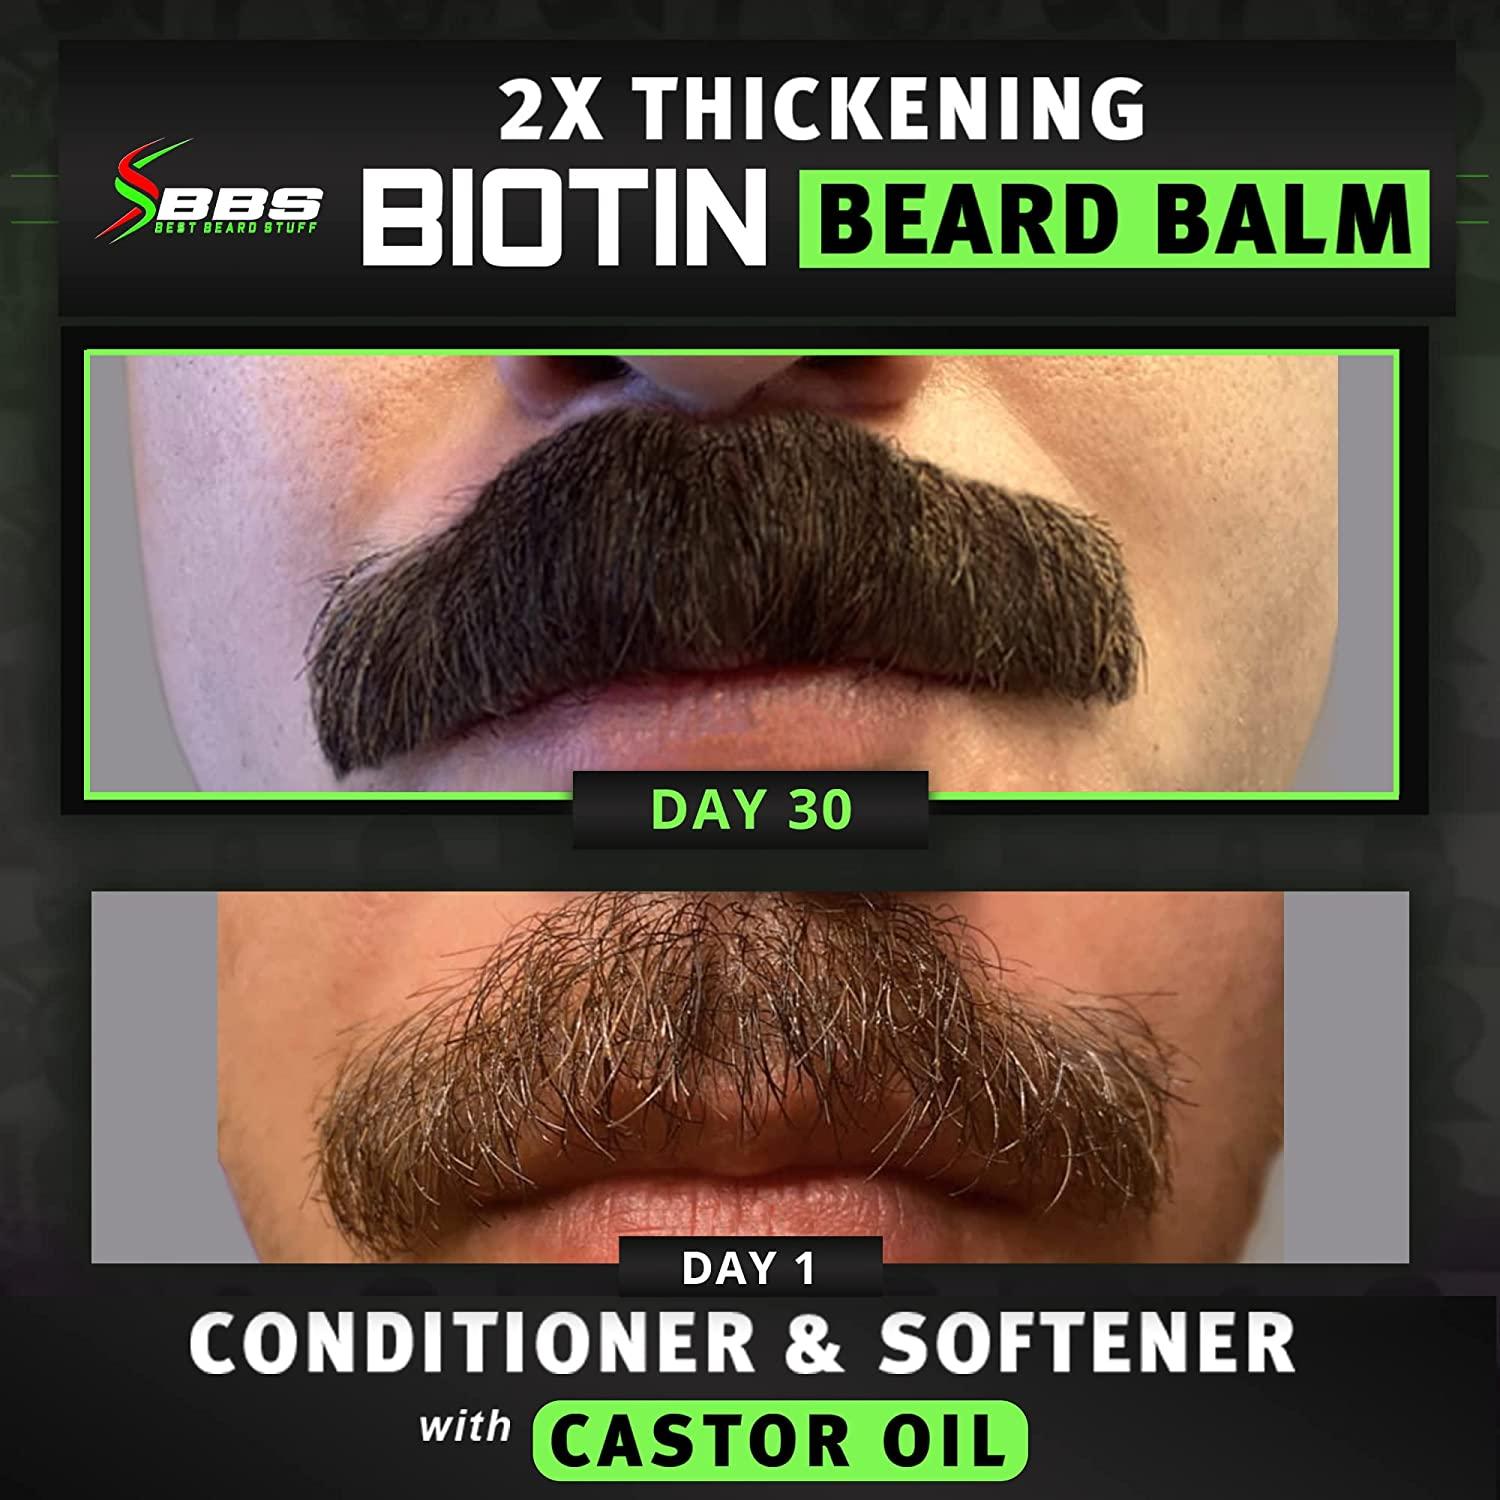 2X Thickening BIOTIN Beard Balm for Men / Mustache Wax for Thicker Facial  Hair Growth - Leave in Conditioner - Softener - Moisturizer - All Natural  Care Treatment - Castor Oil - BBS USA Vegan Product